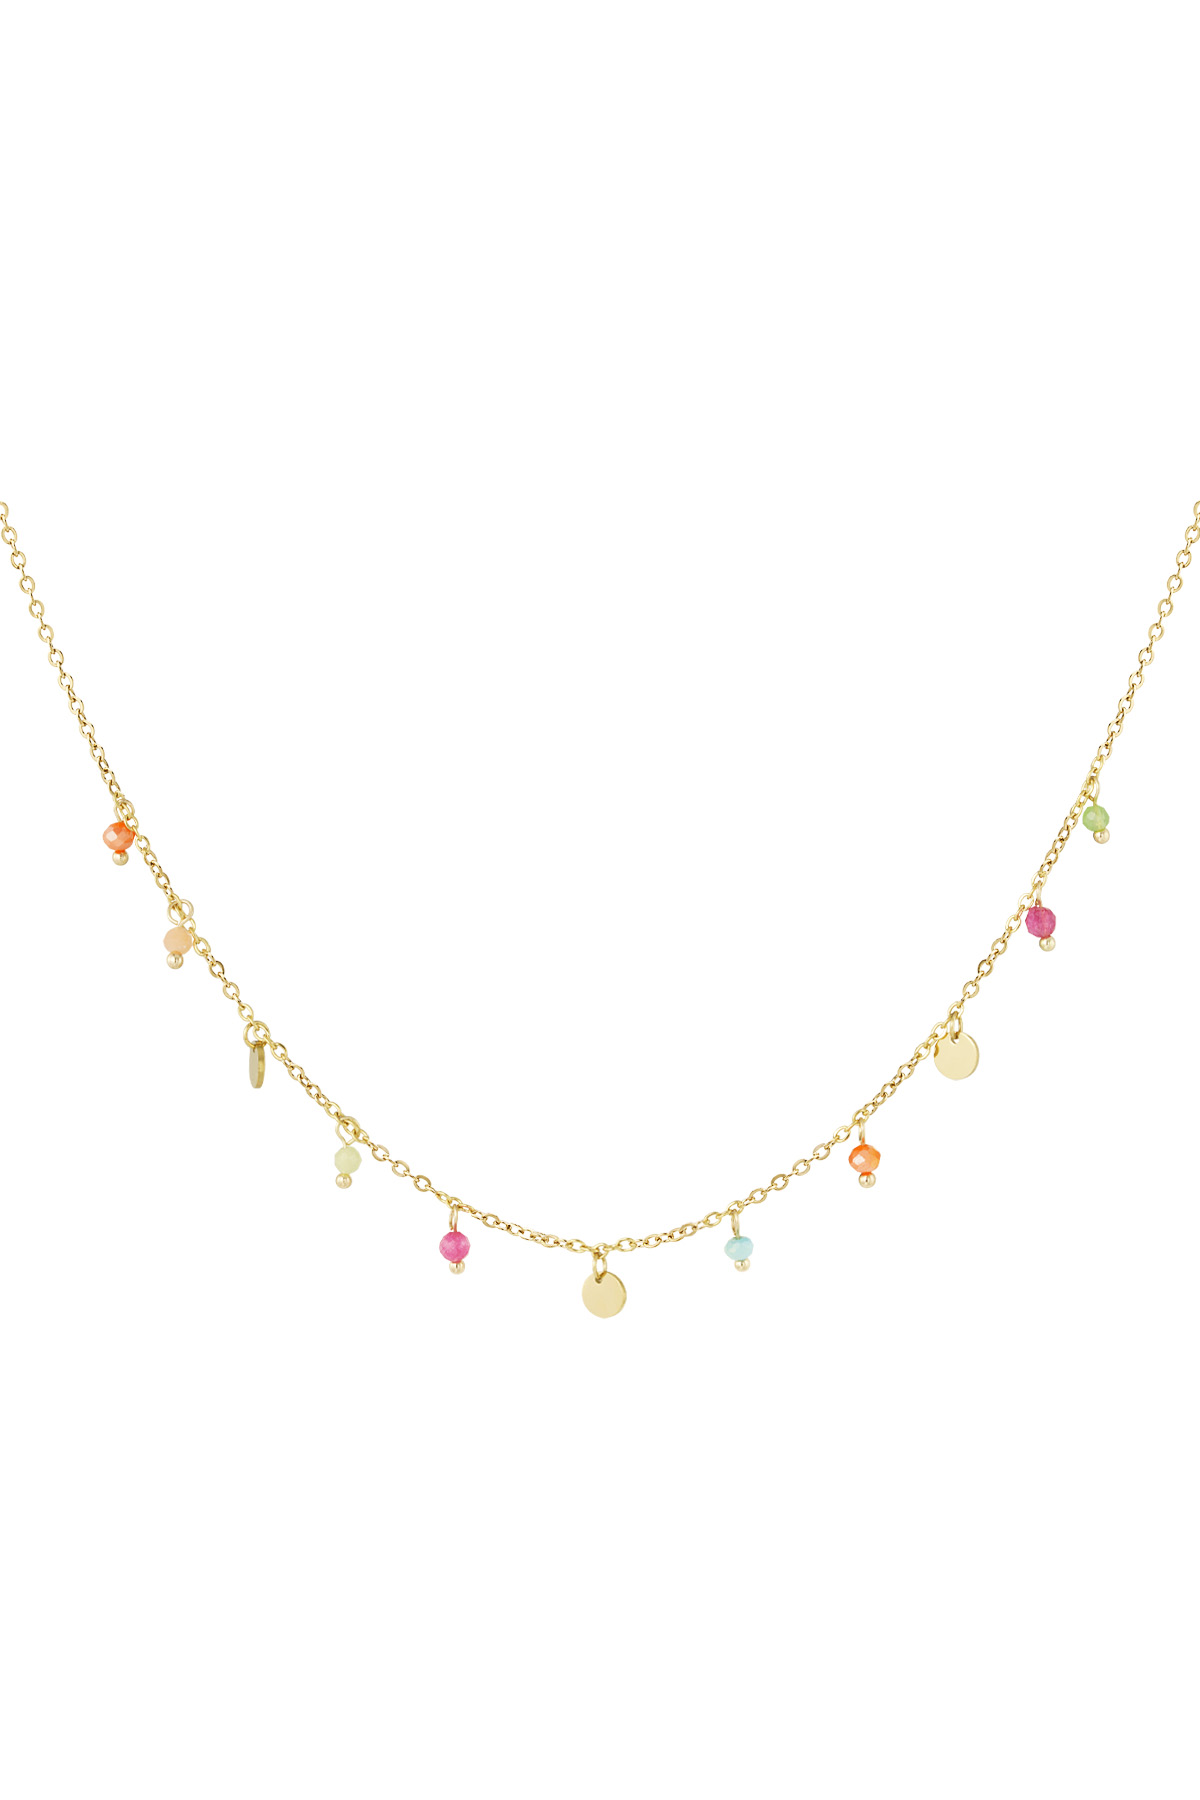 Bedelketting colorful day - goud h5 